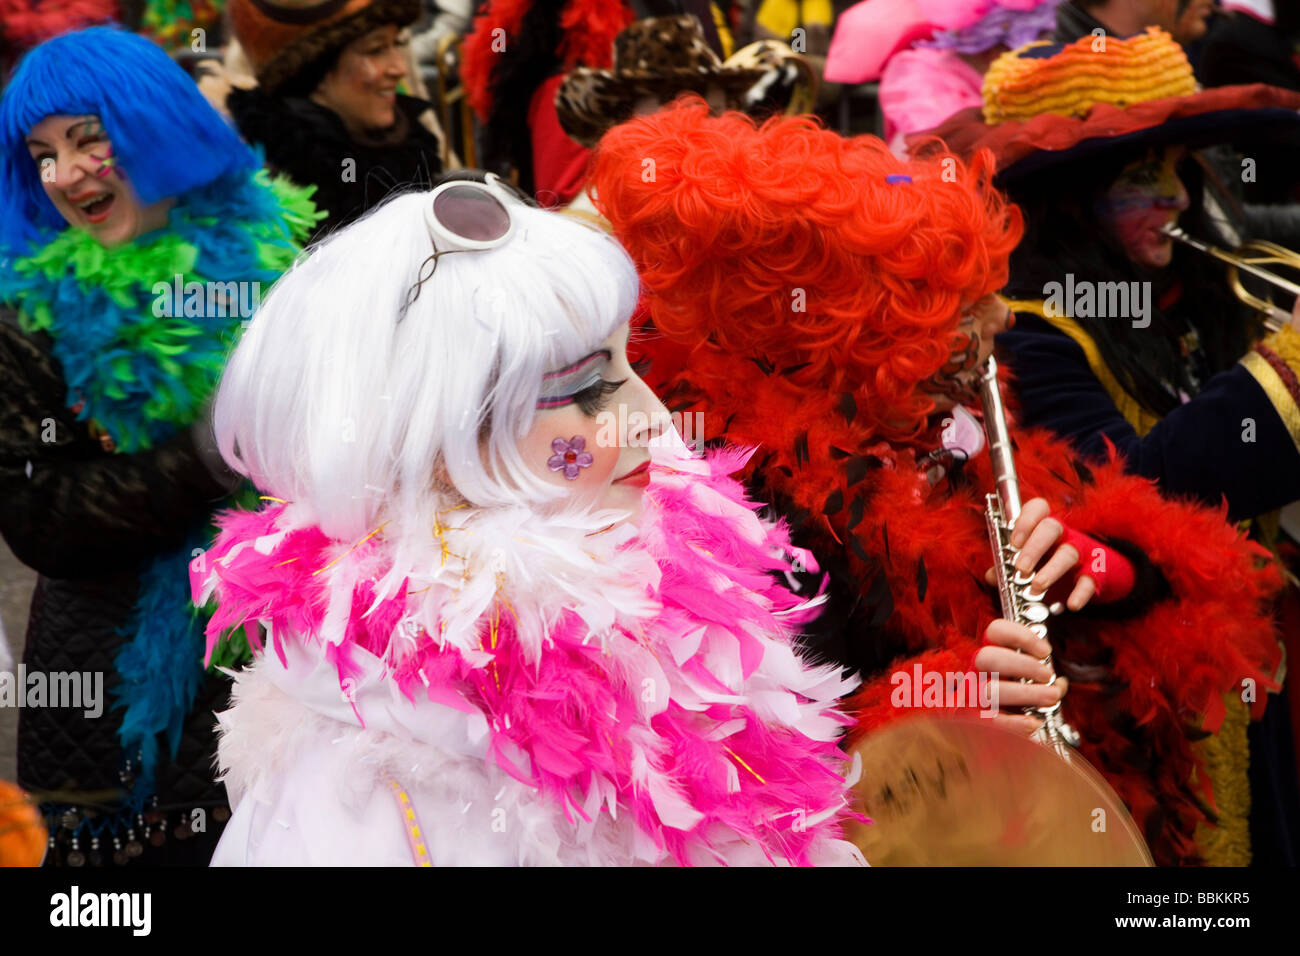 Carnival in Maastricht This festival is different then in other parts of Holland as there are around 100 bands playing live fanfara music in the city centre Most of the celebrations take place outside on the streets and squares During three days of celebrations people dance chat joke and especially drink a lot of alcohol Stock Photo